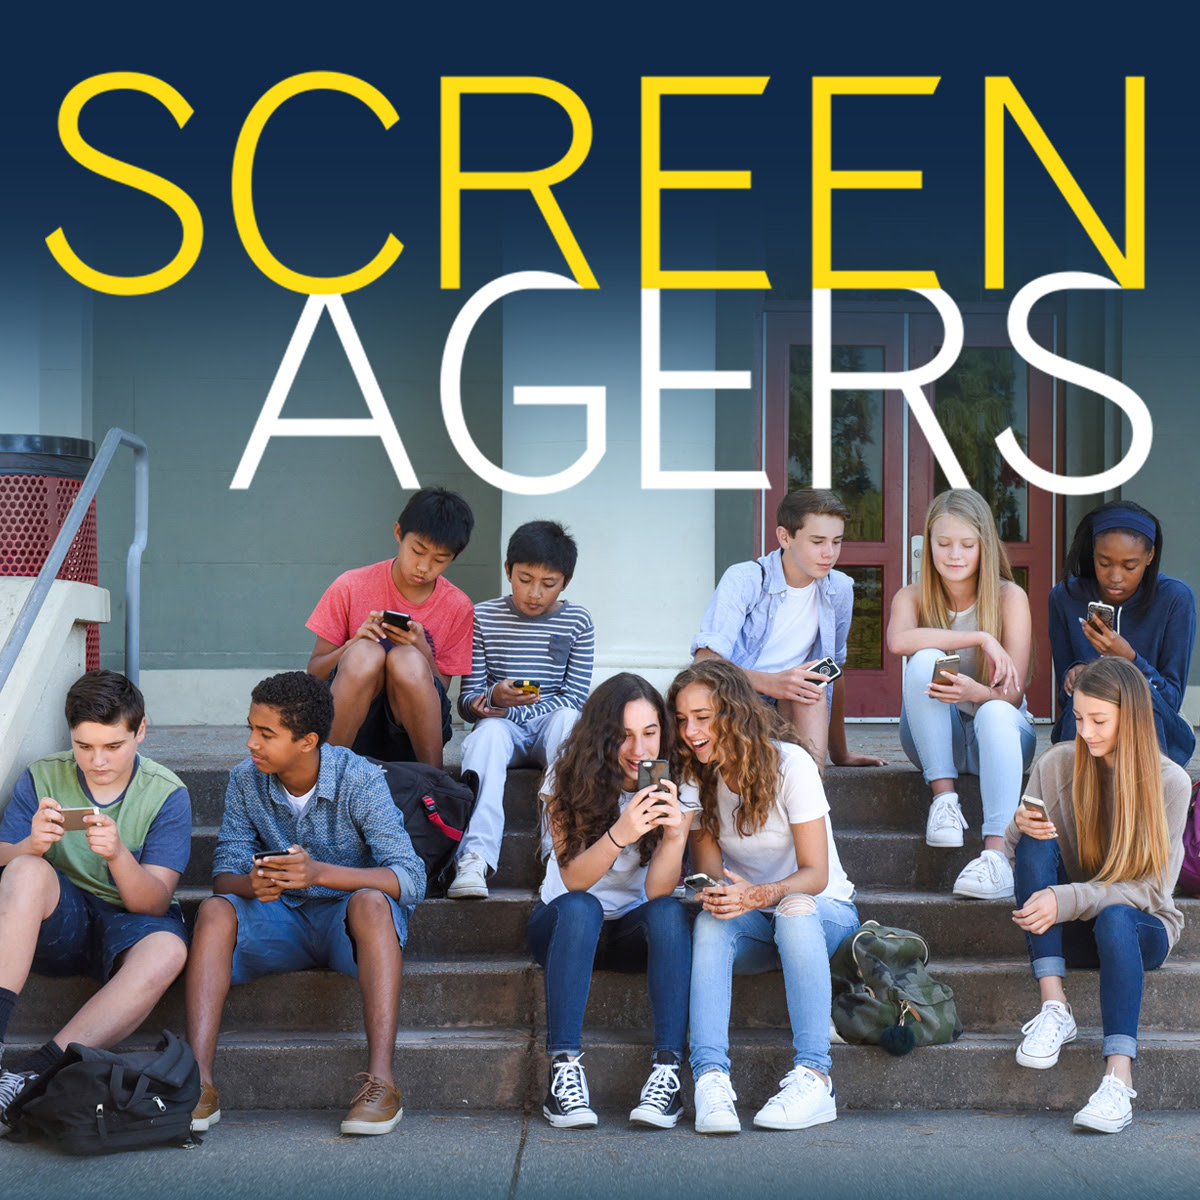 Screenagers Film Presented By Council on Chemical Abuse